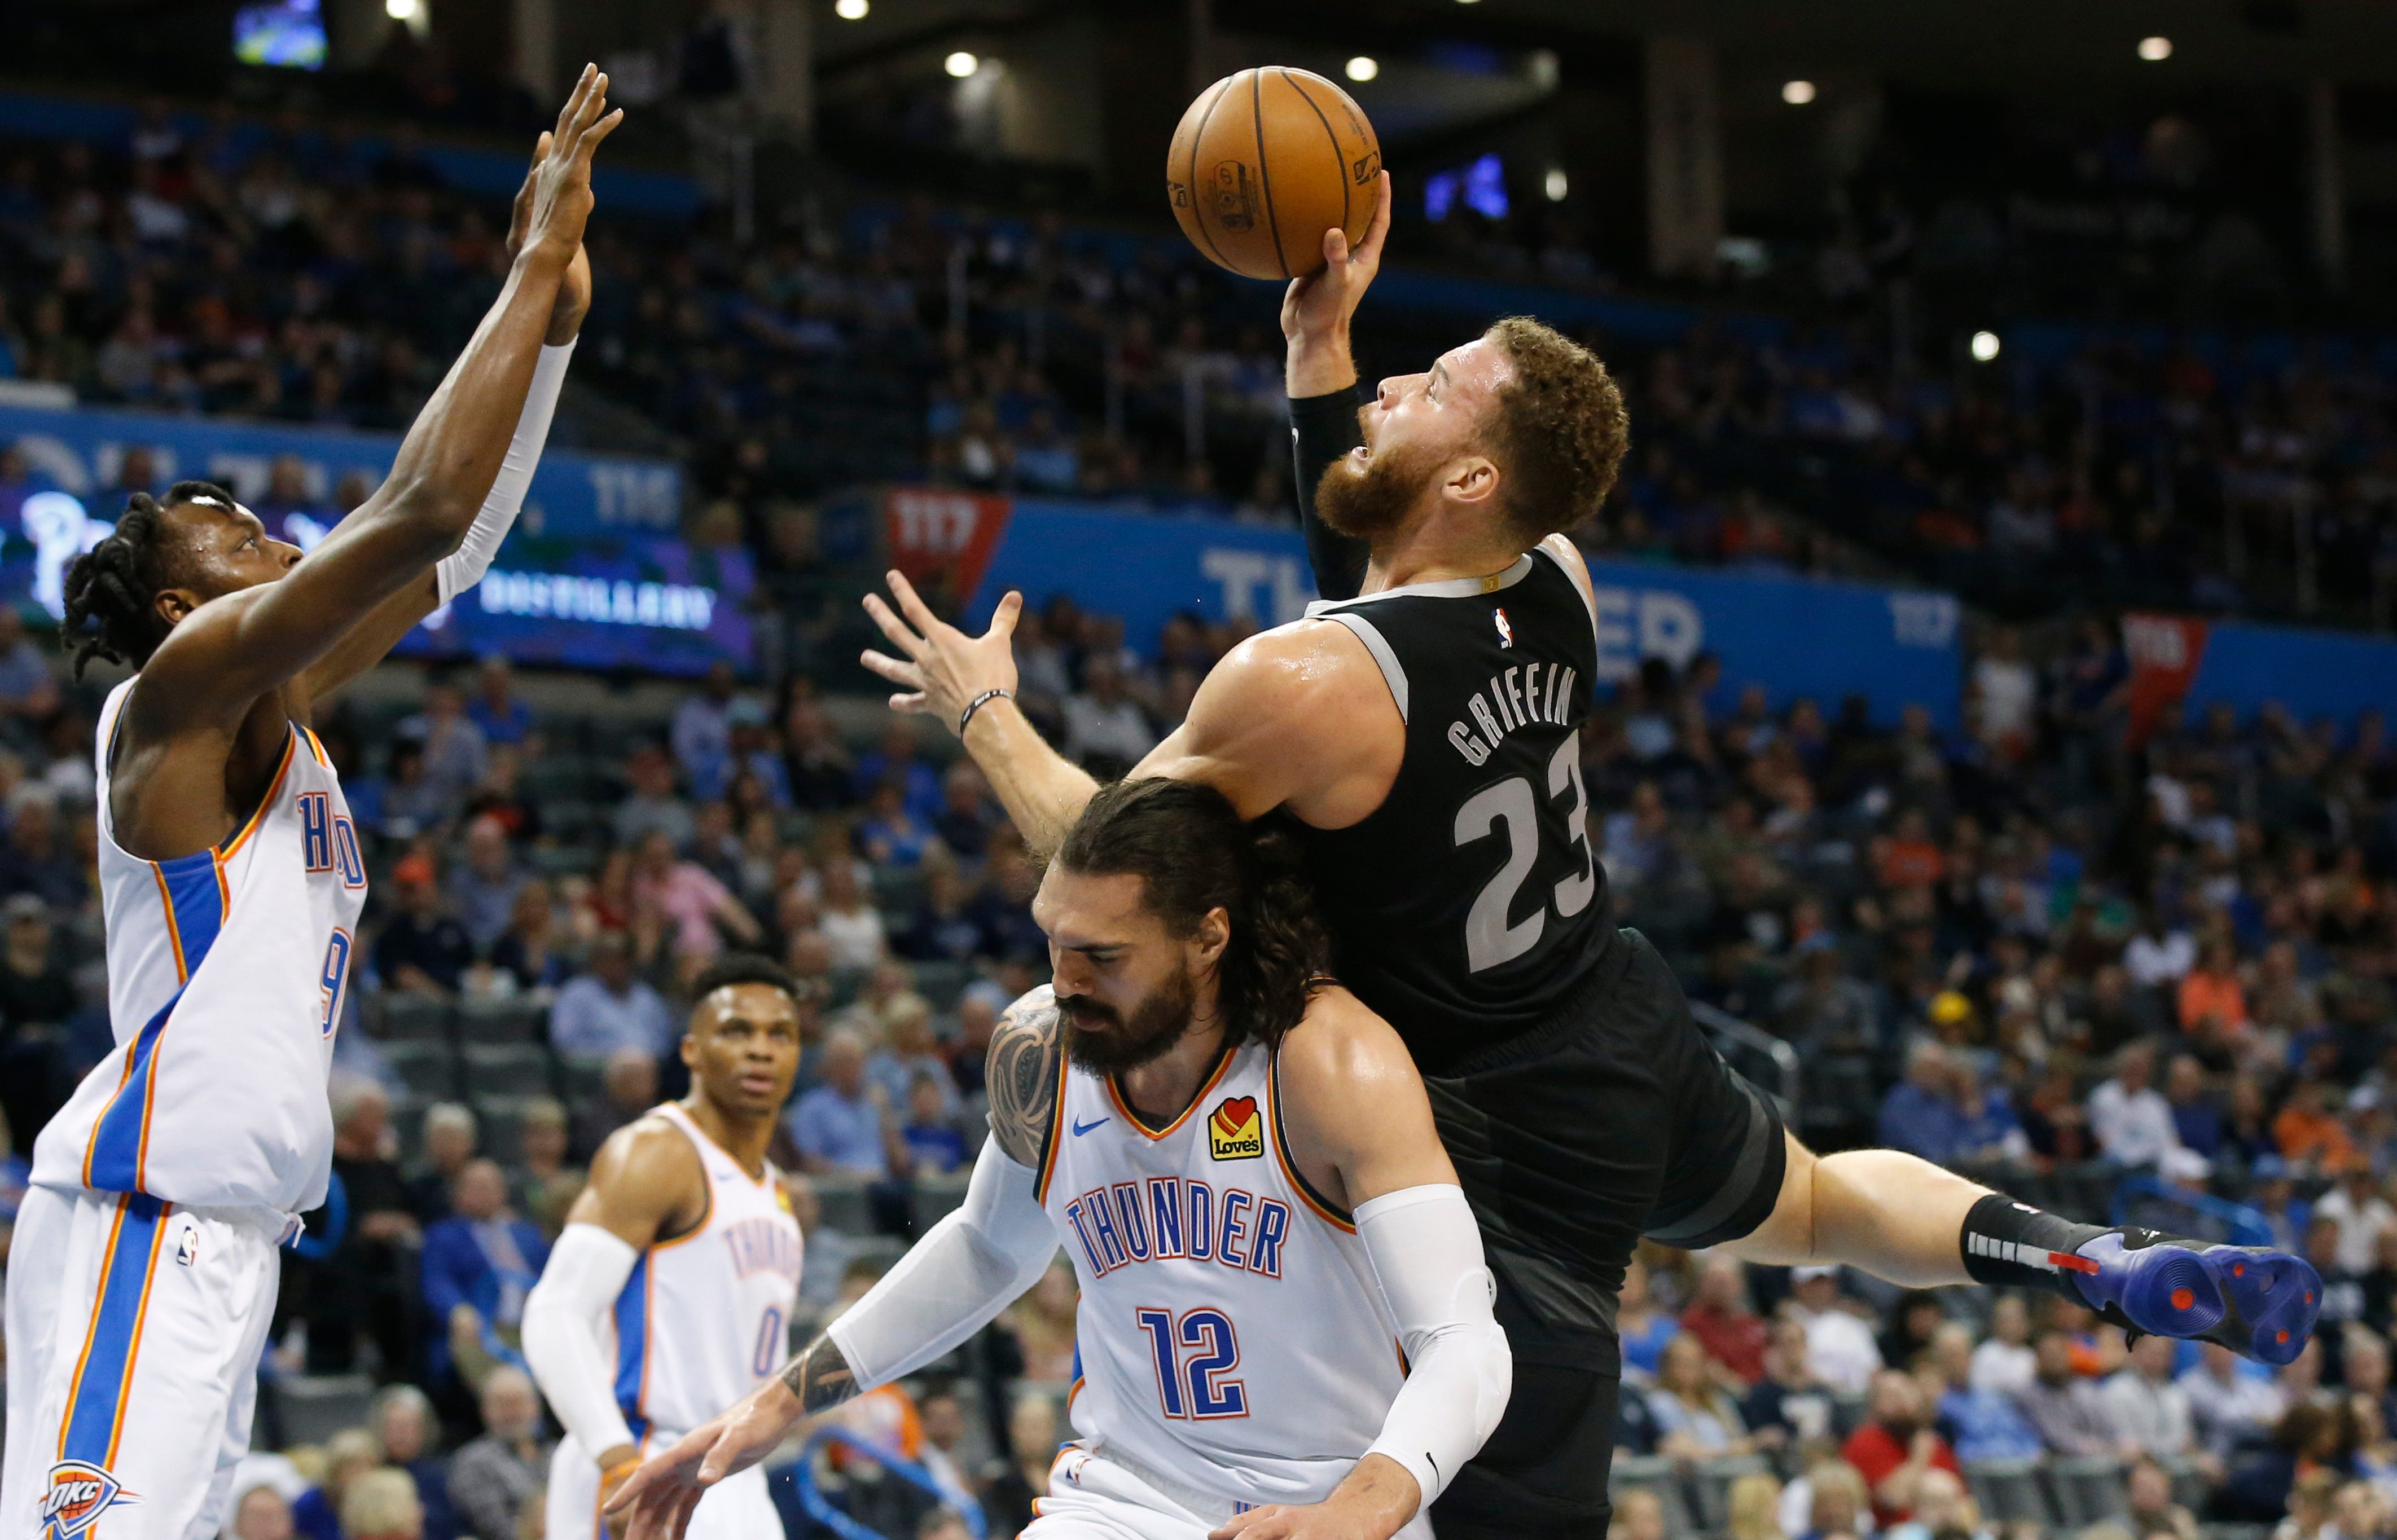 Detroit Pistons forward Blake Griffin (23) is fouled by Oklahoma City Thunder center Steven Adams (12) as he shoots in front of forward Jerami Grant, left, during the first half.